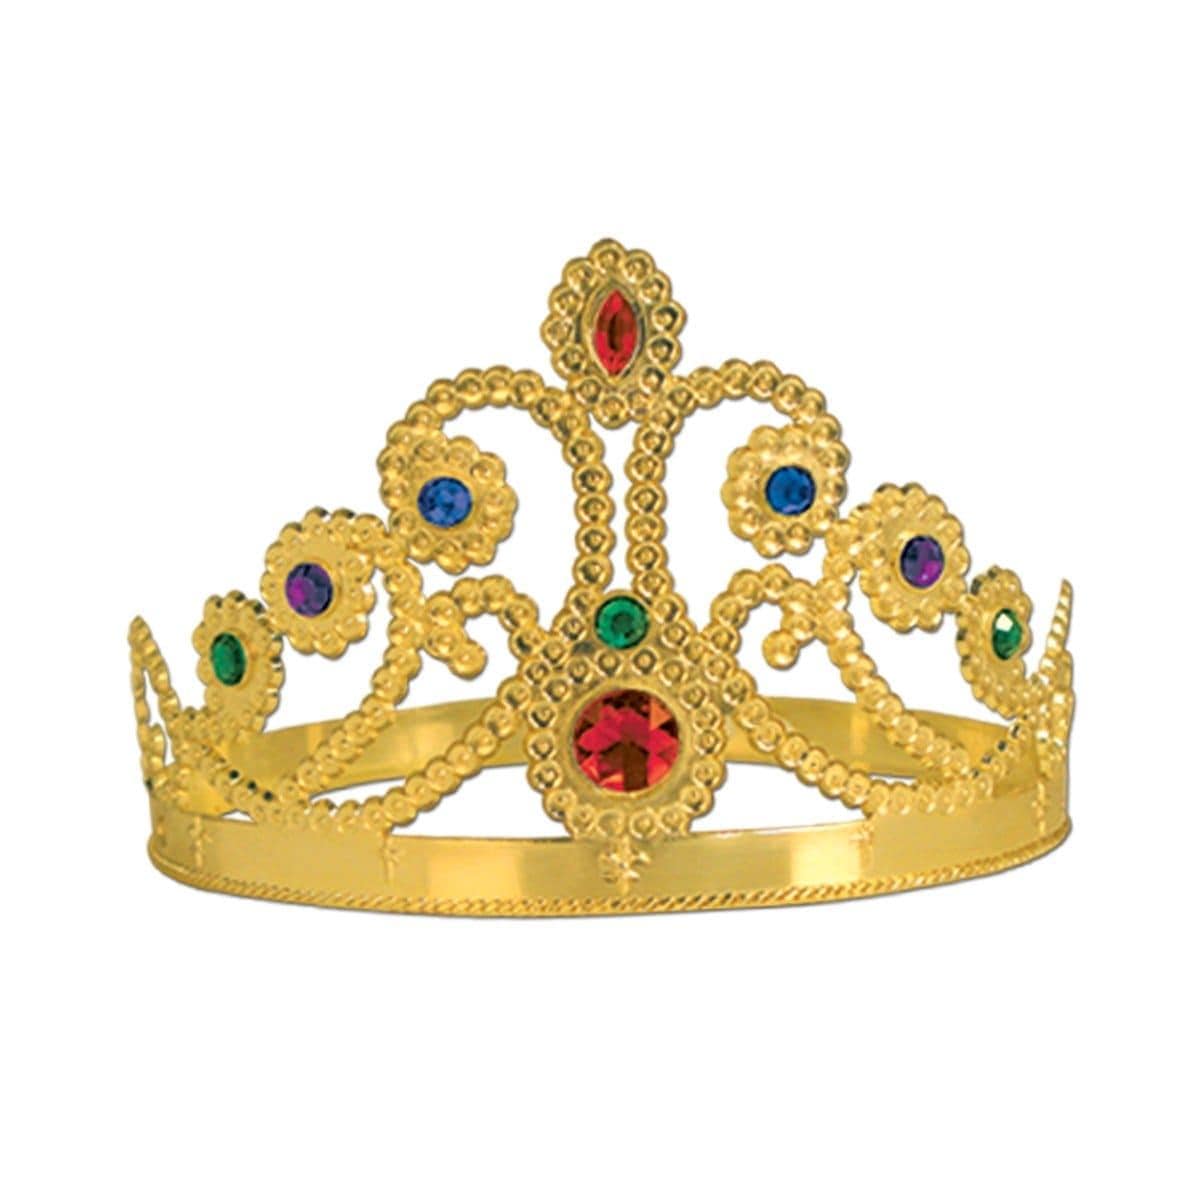 Buy Costume Accessories Jeweled Queen Tiara sold at Party Expert